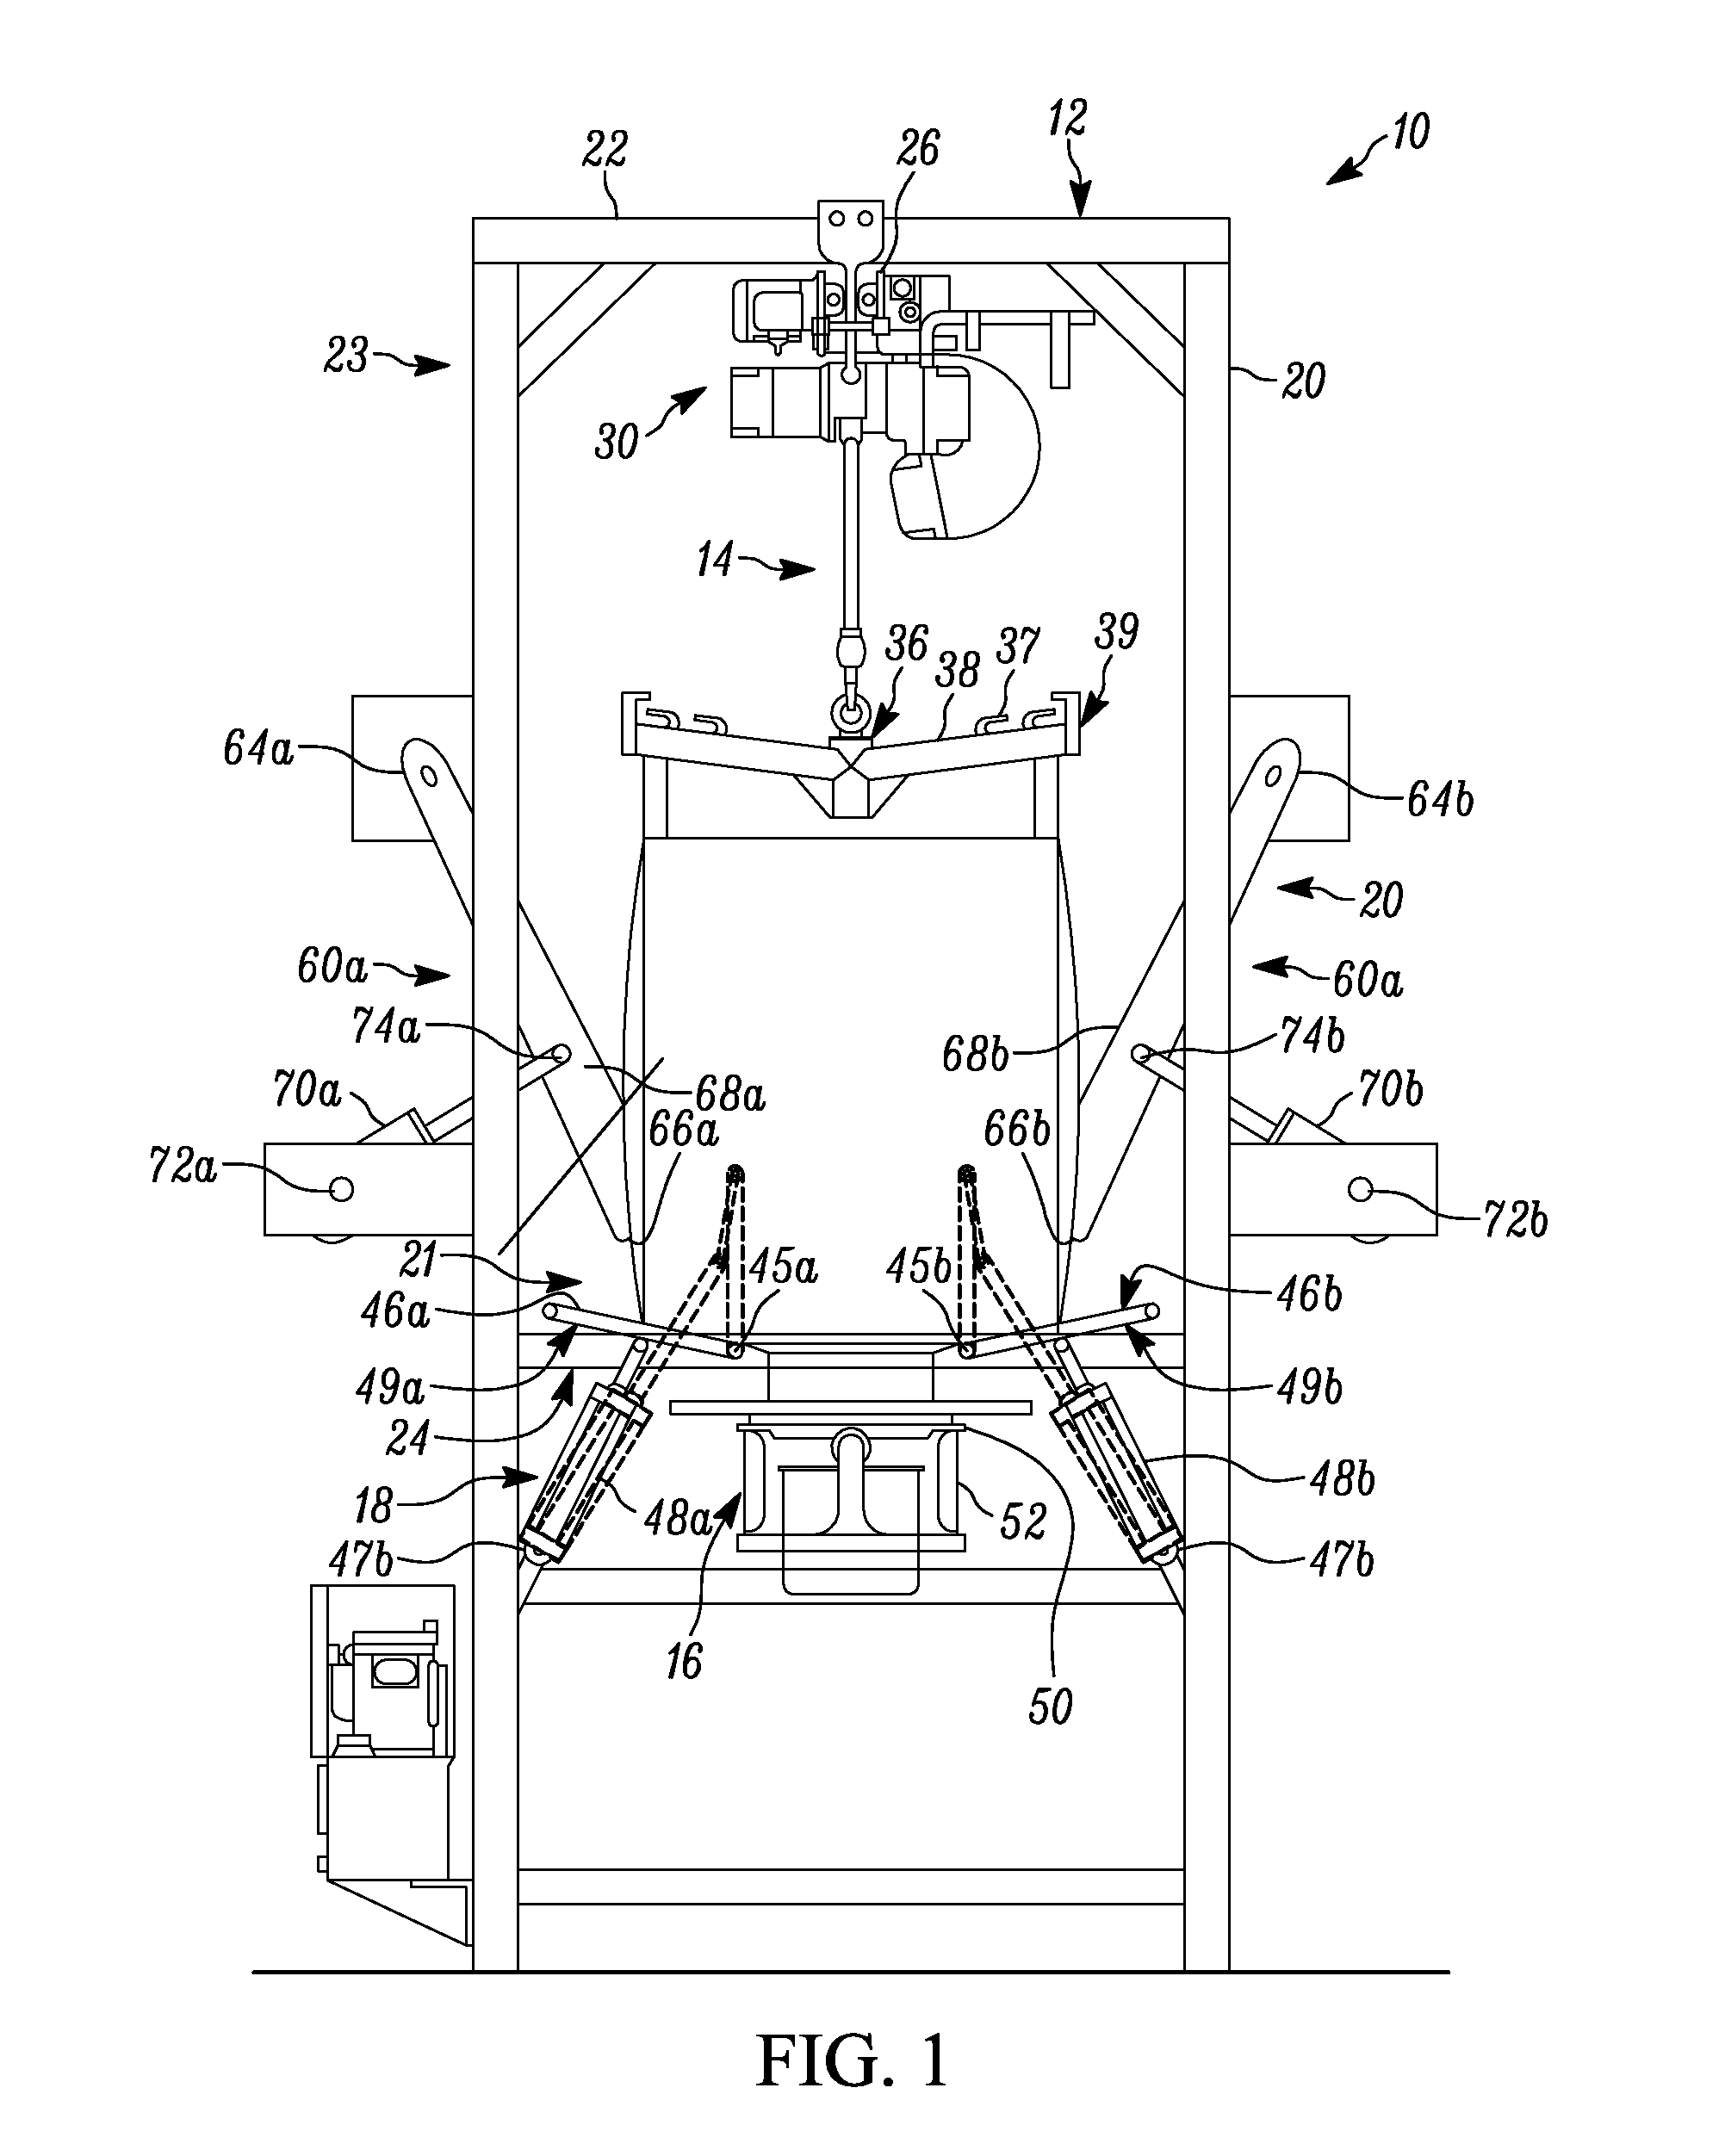 Bulk bag discharge assembly including a conditioning assembly